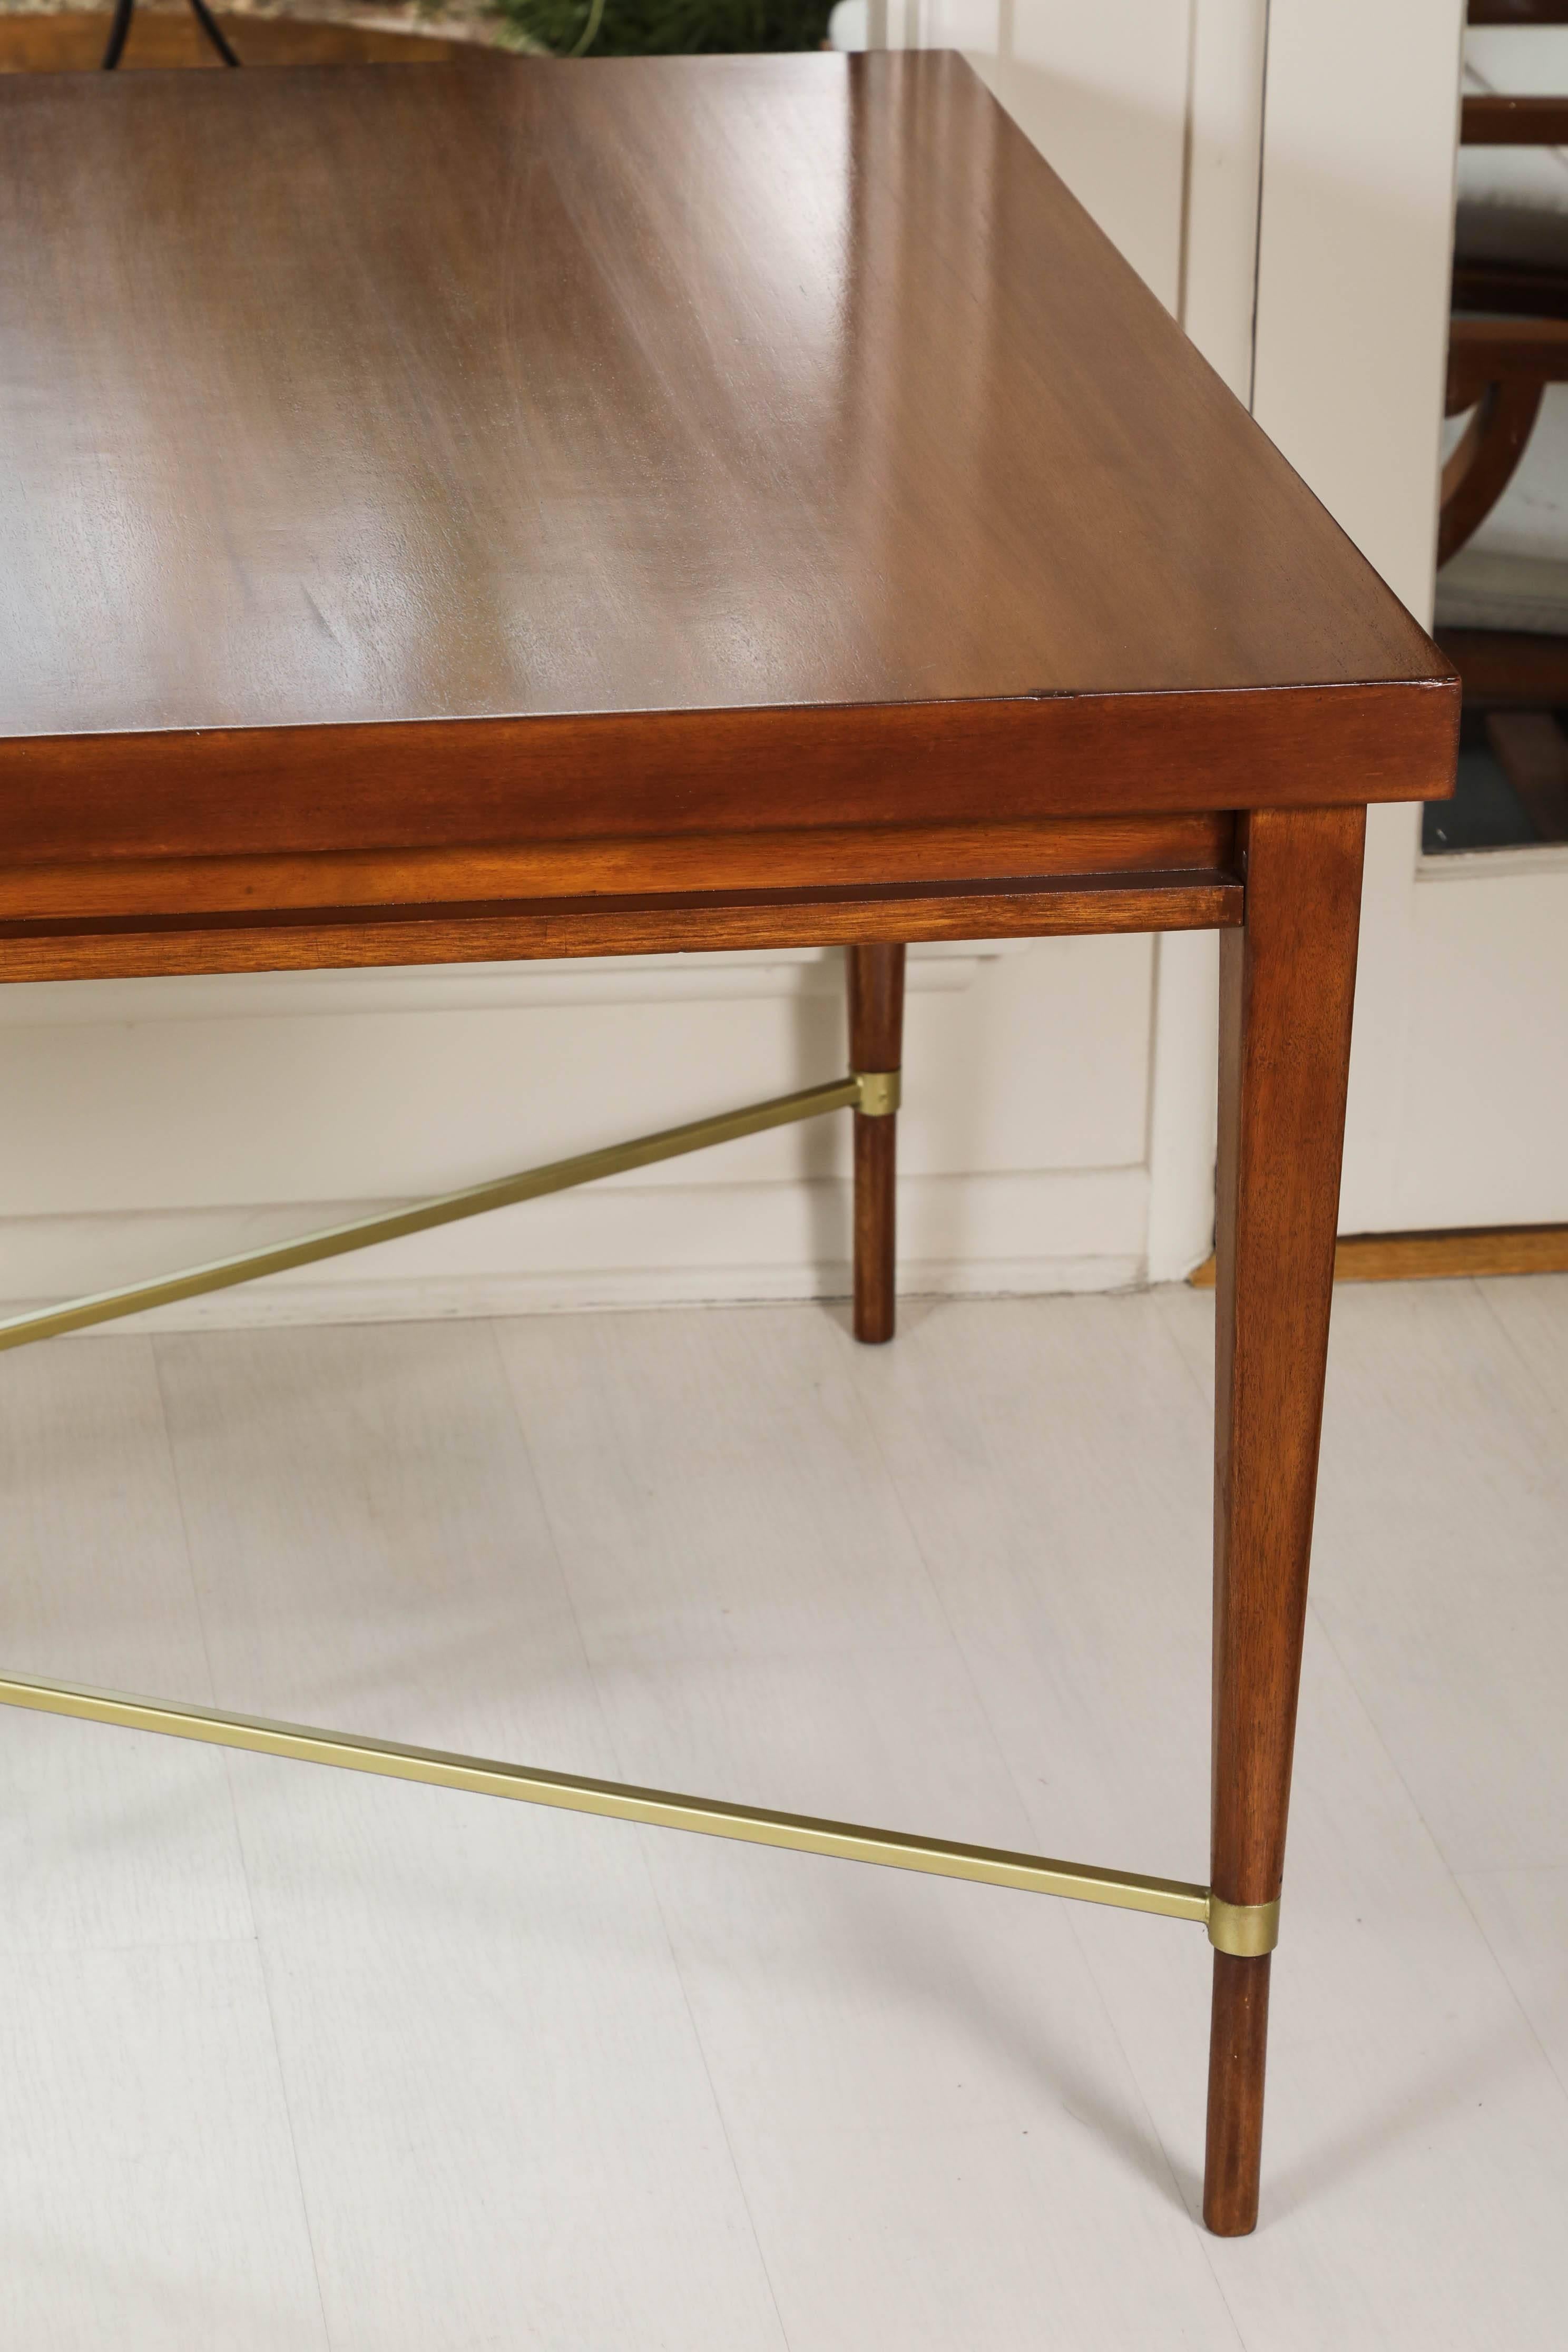 Paul McCobb Midcentury Dining Table In Excellent Condition For Sale In Santa Monica, CA